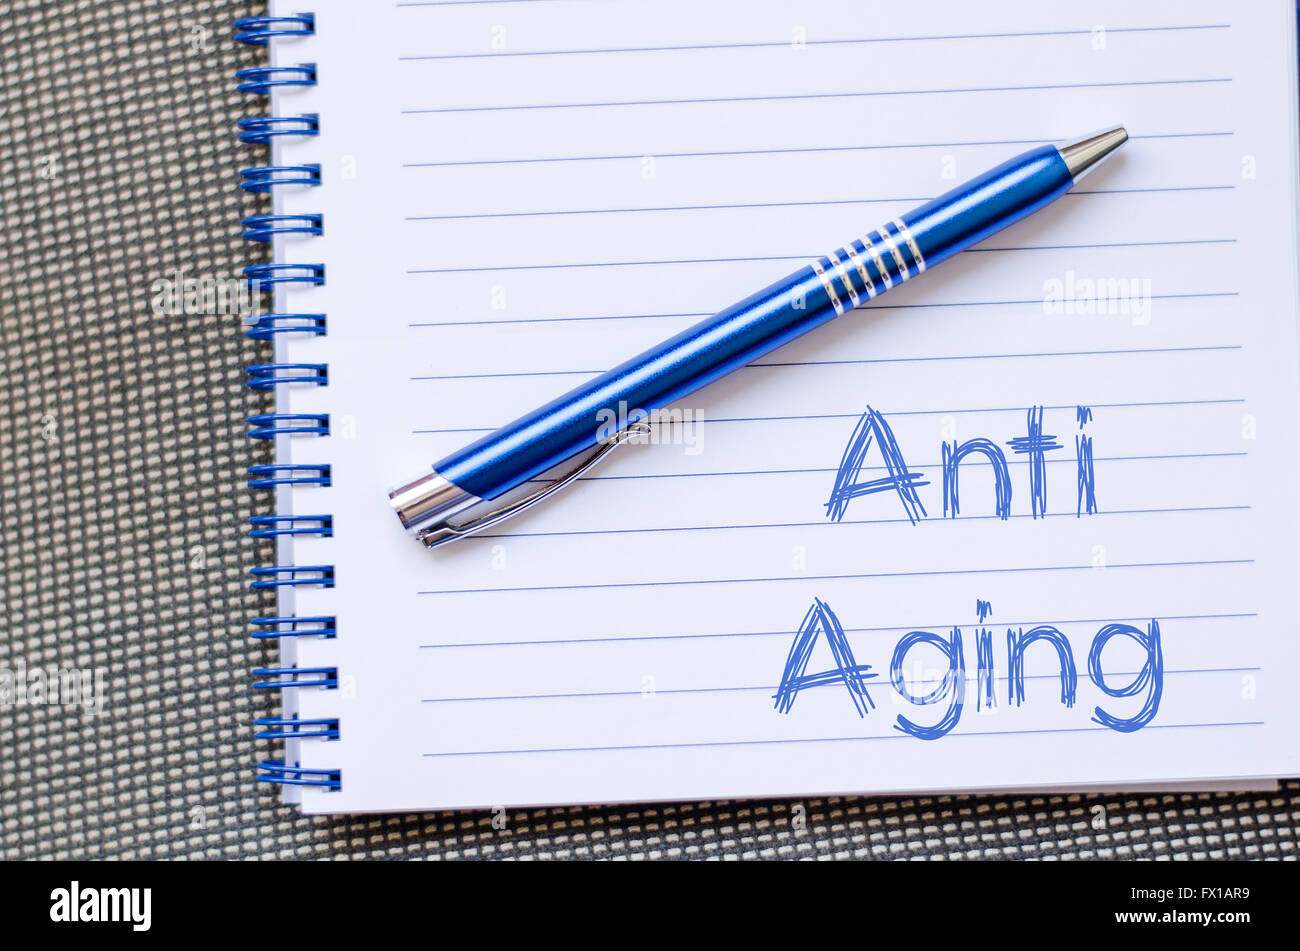 Anti aging text concept write on notebook Stock Photo